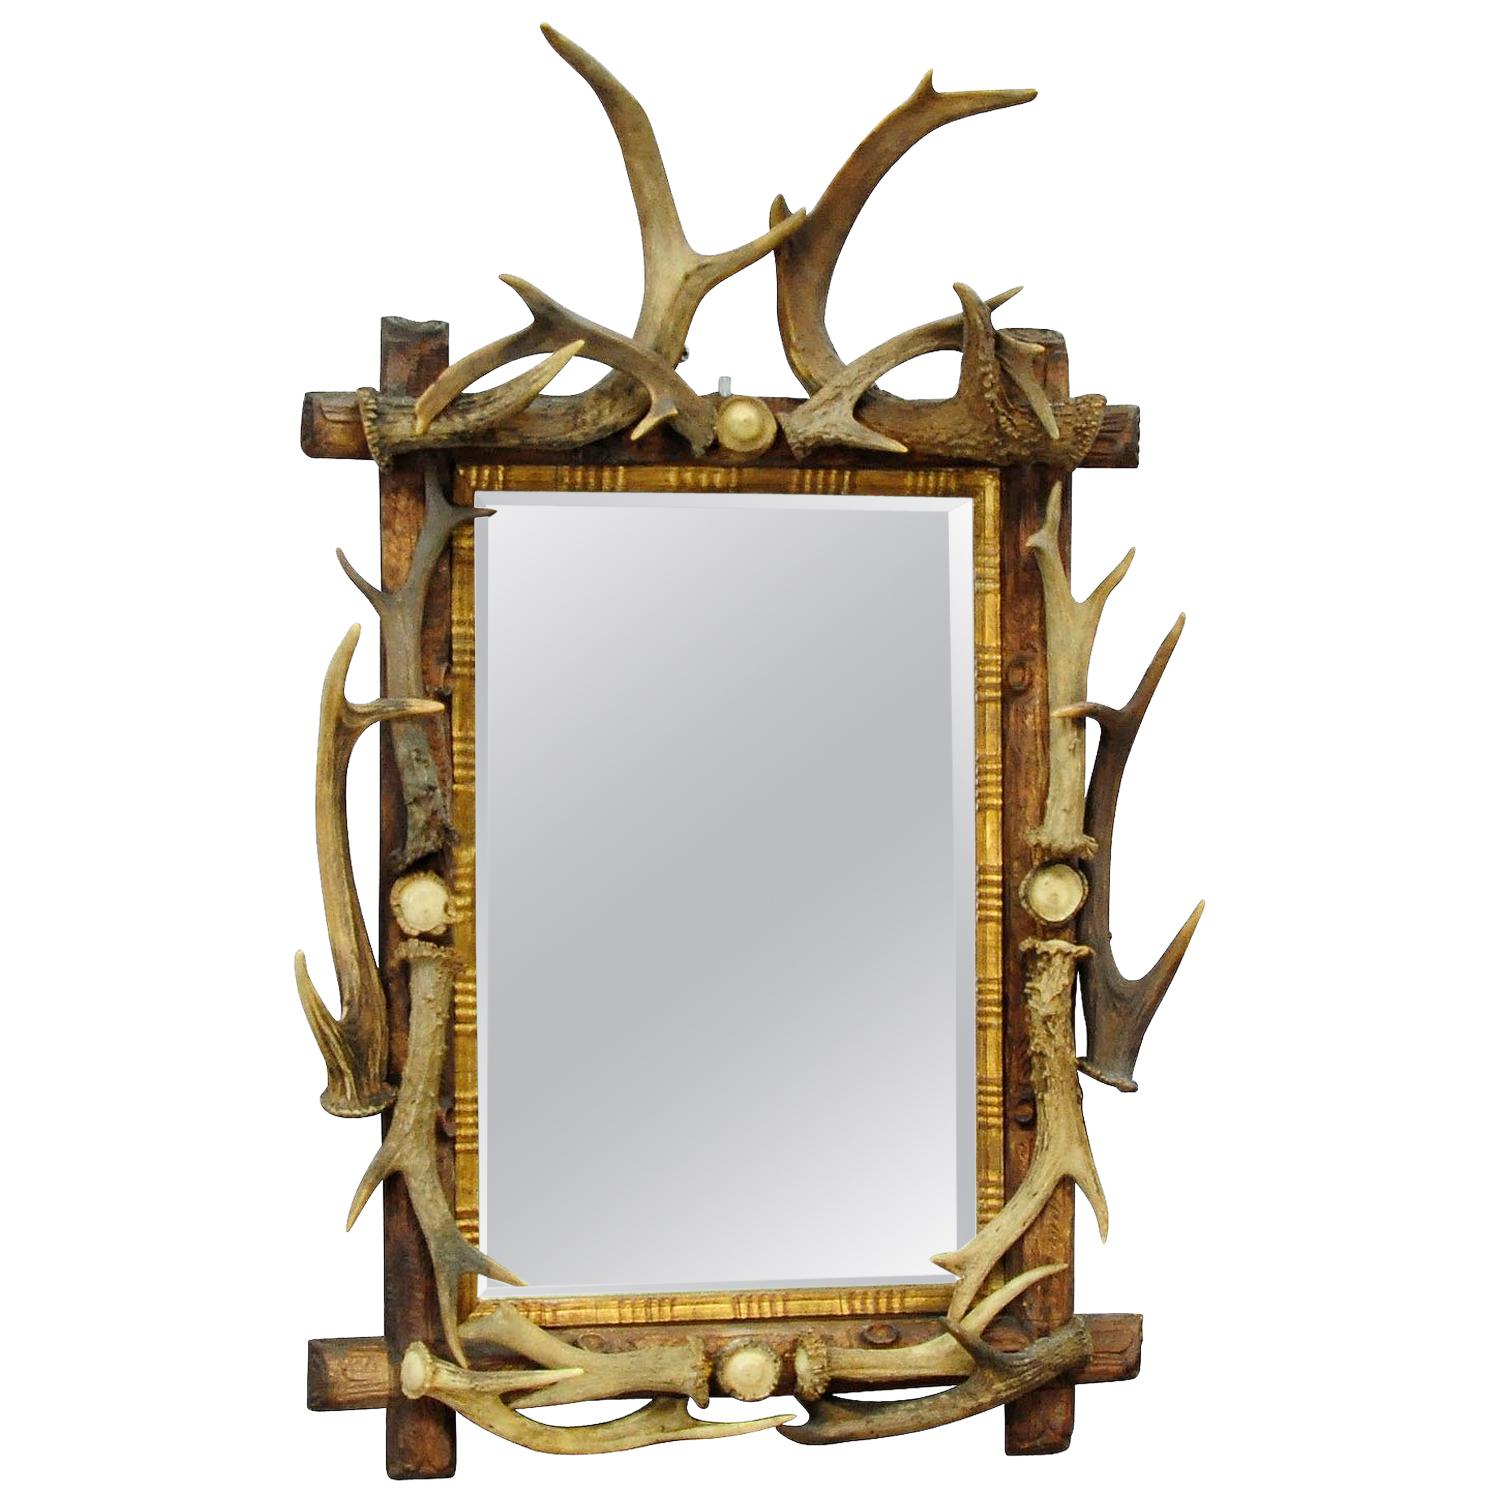 Antique Antler Frame with Rustic Antler Decorations and Mirror